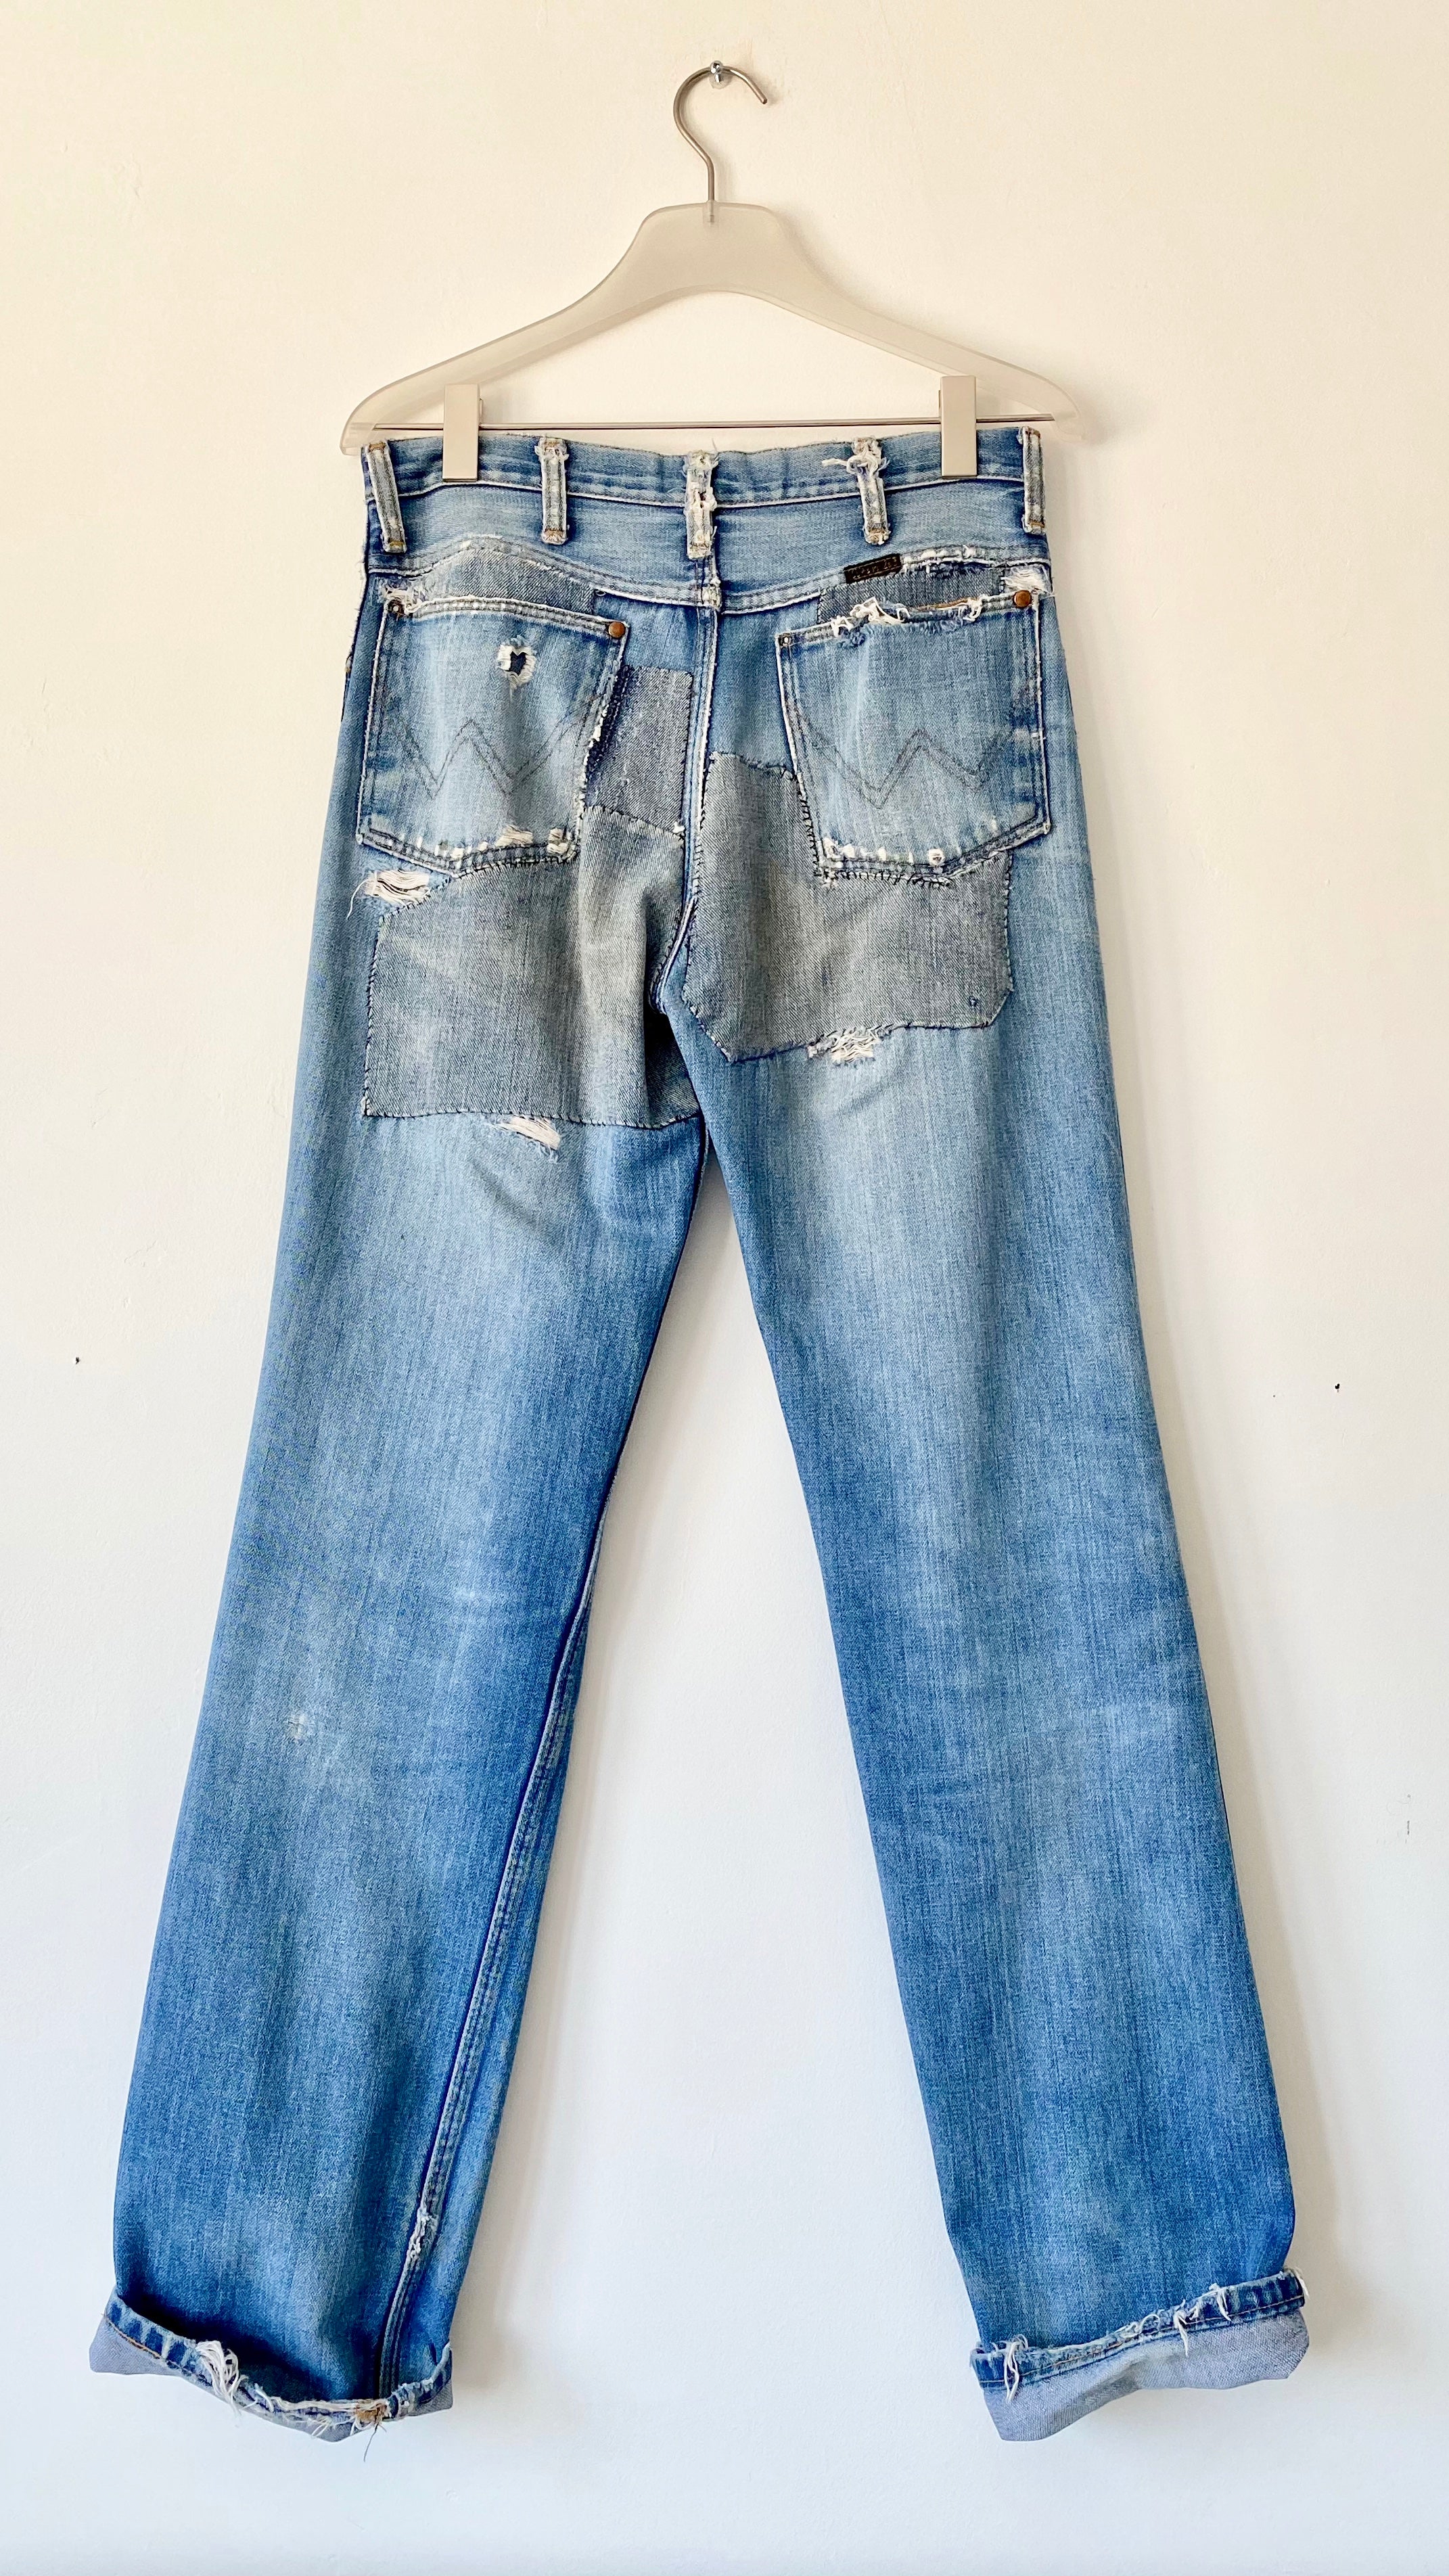 Vintage Wranglers 1970s Super Patched Jeans size 29